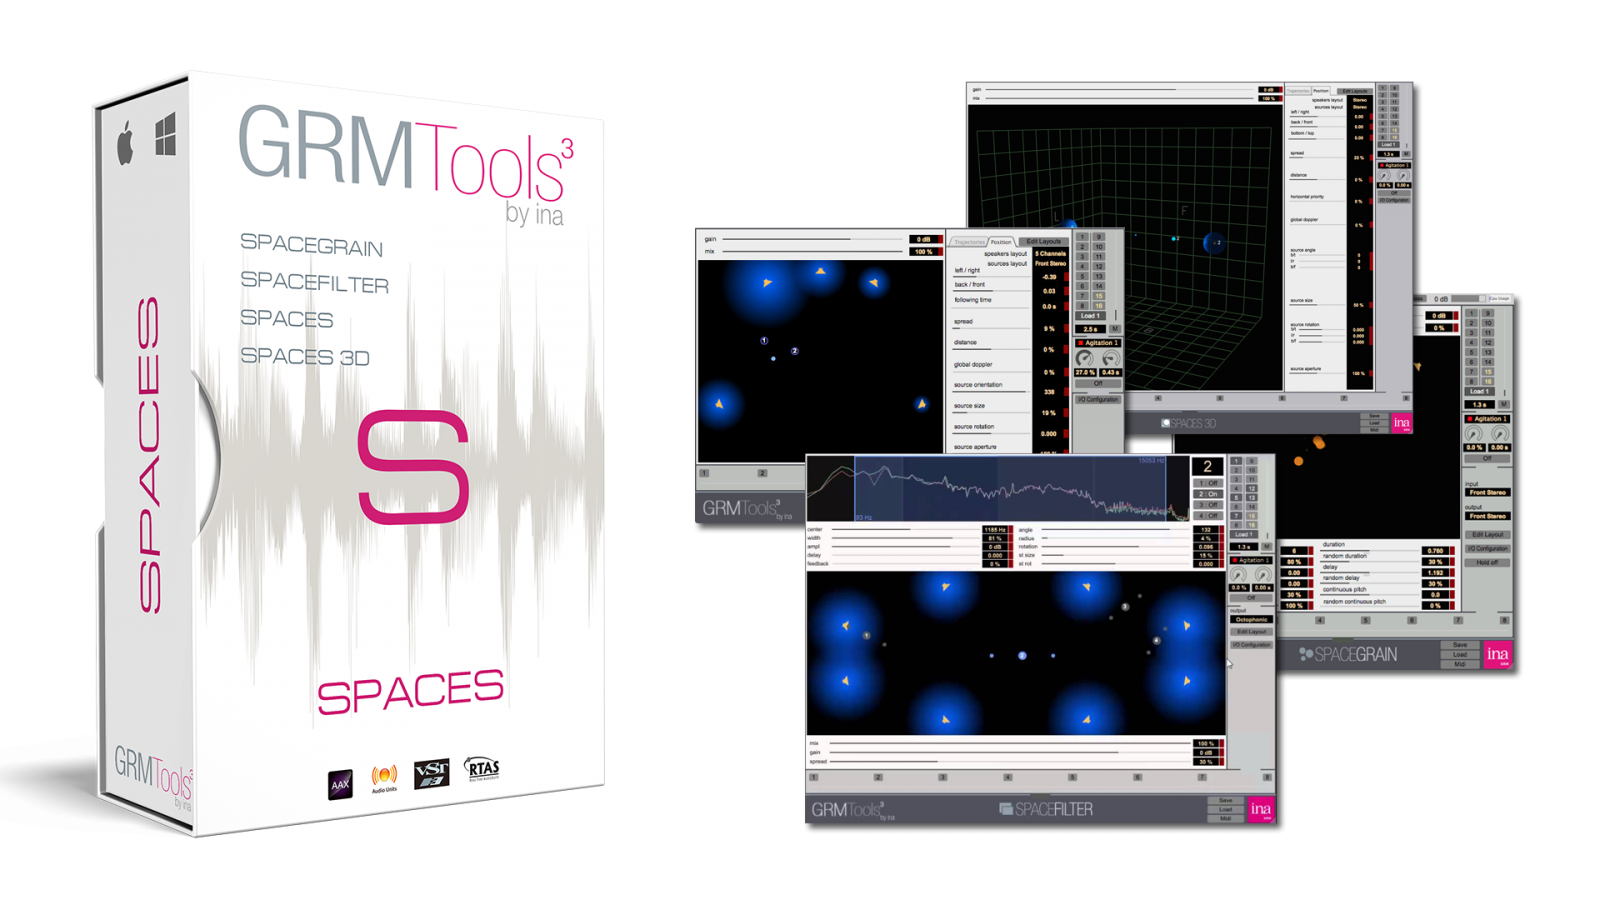 Ina - GRM GRM Tools Spaces